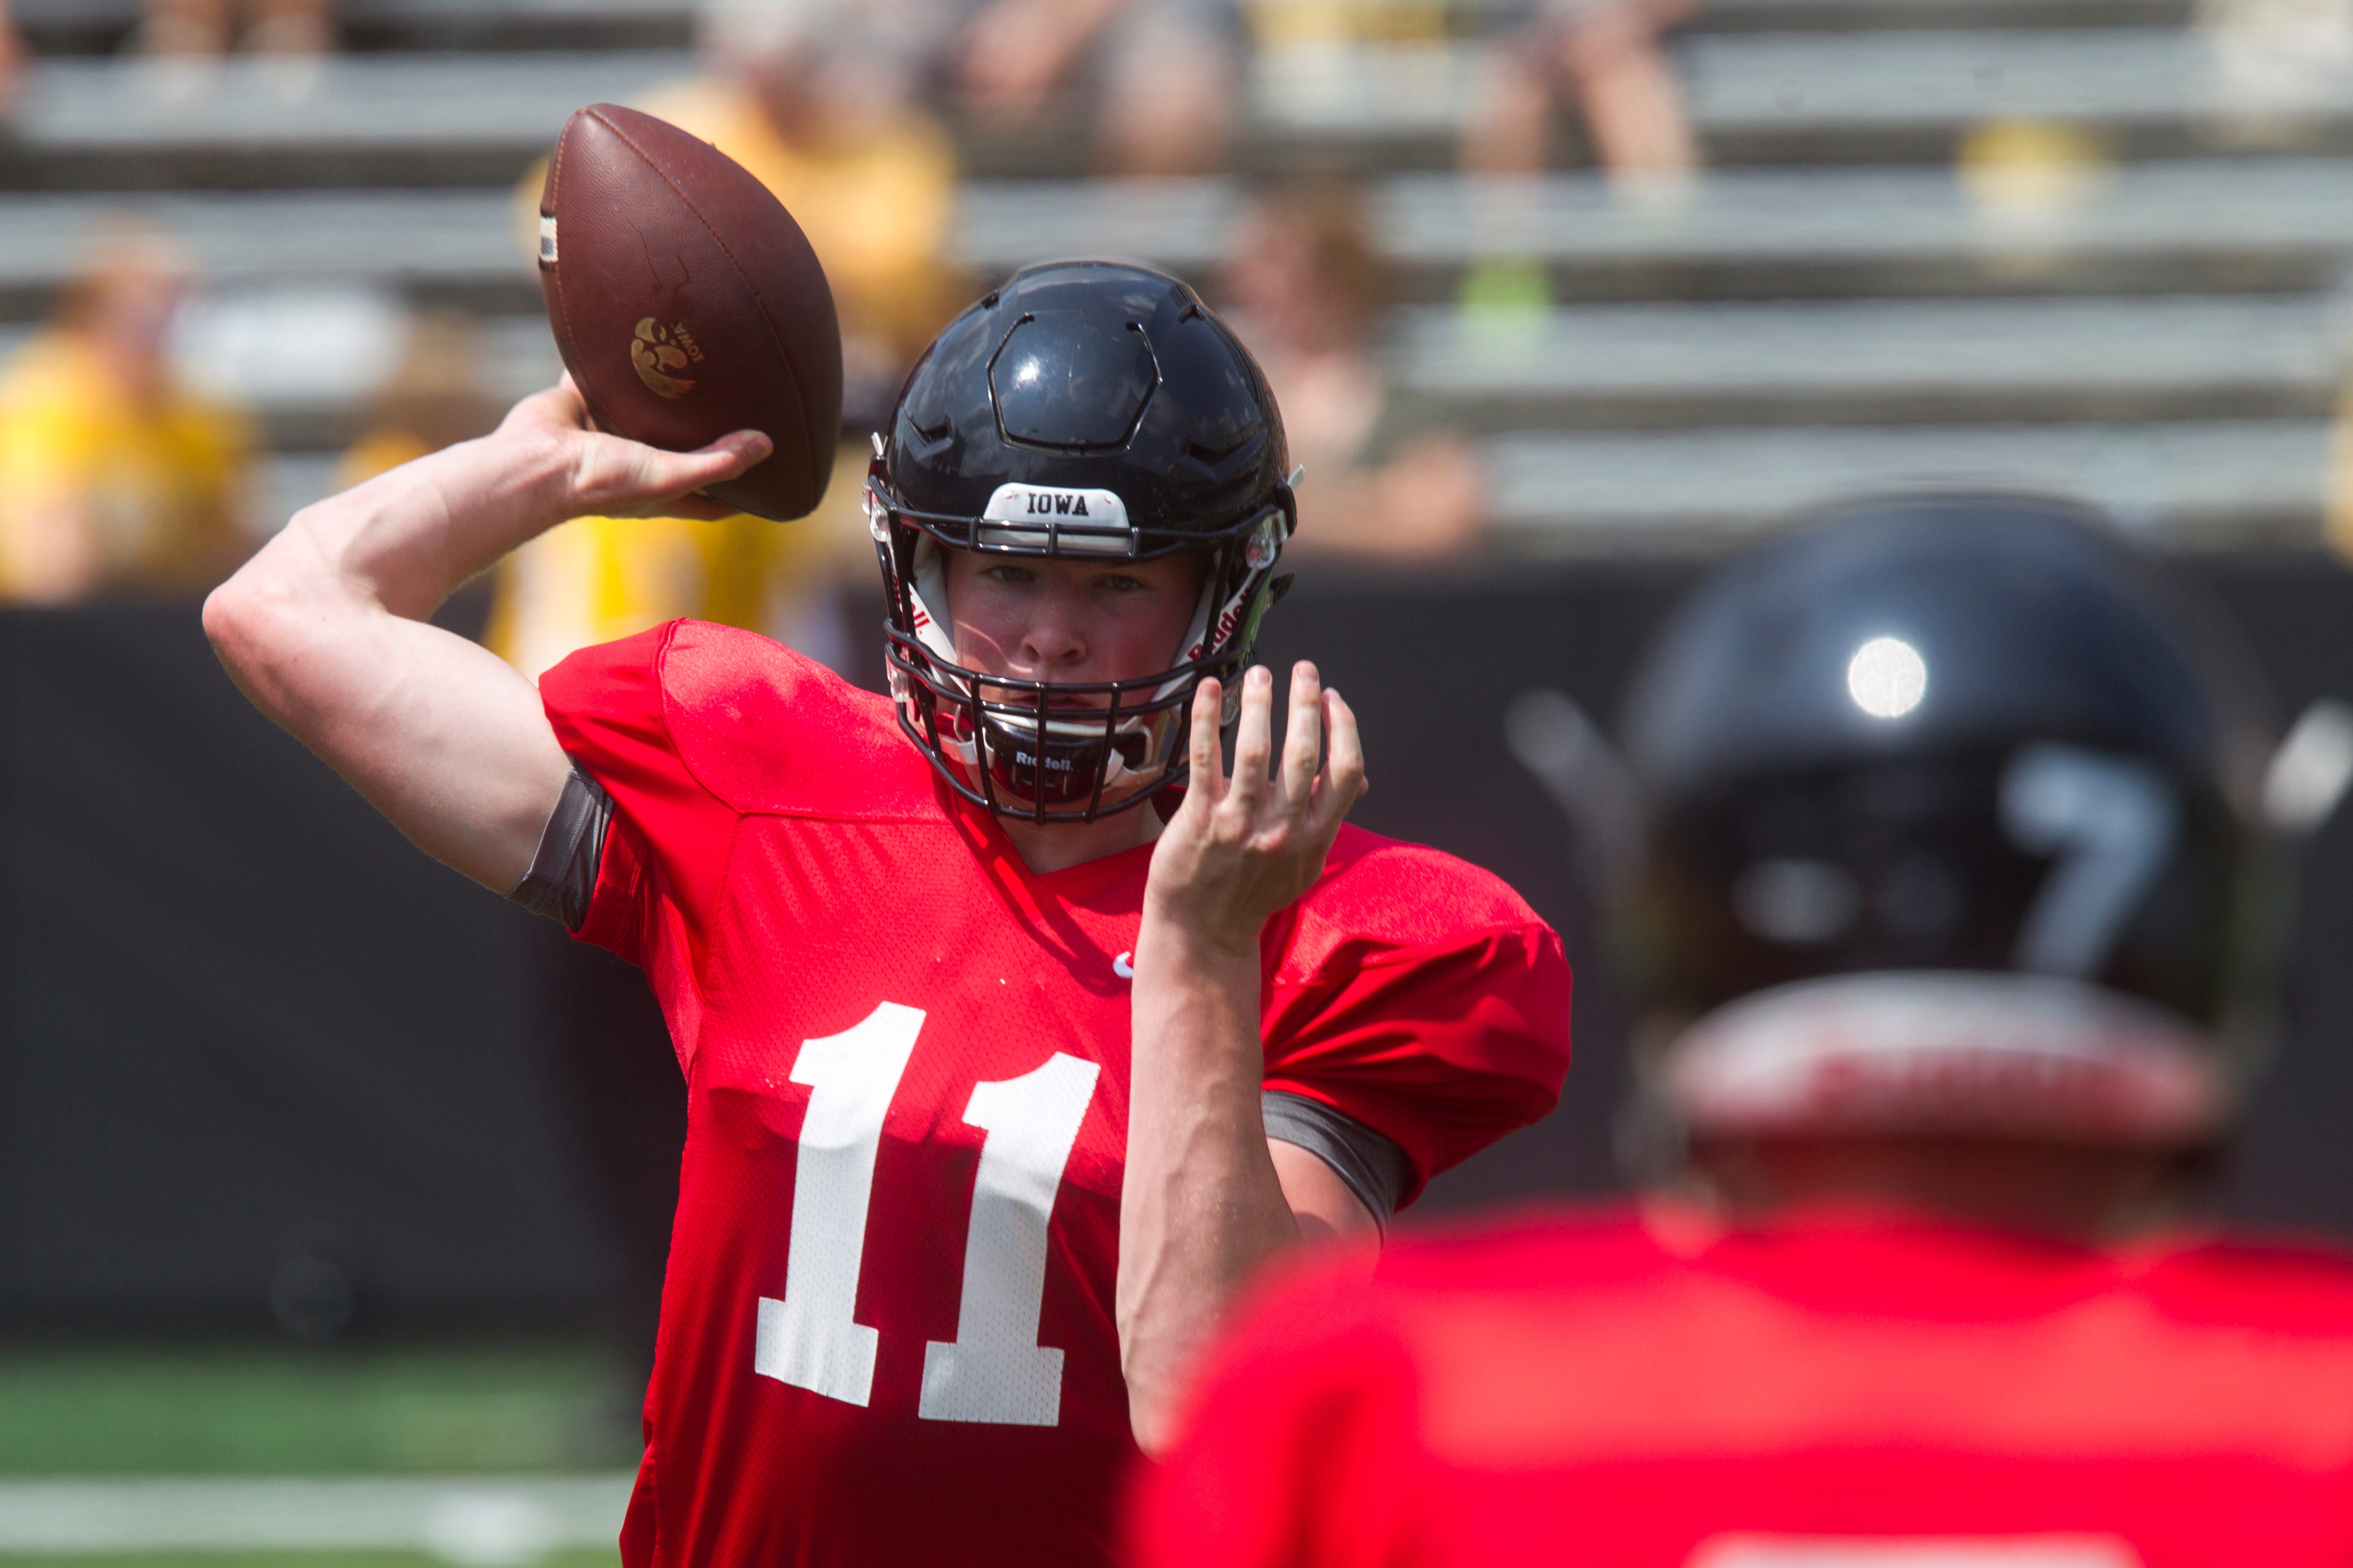 Iowa quarterback Connor Kapisak throws a pass to teammate Spencer Petras while they warm up during a Kids Day practice on Saturday, Aug. 11, 2018, at Kinnick Stadium in Iowa City.